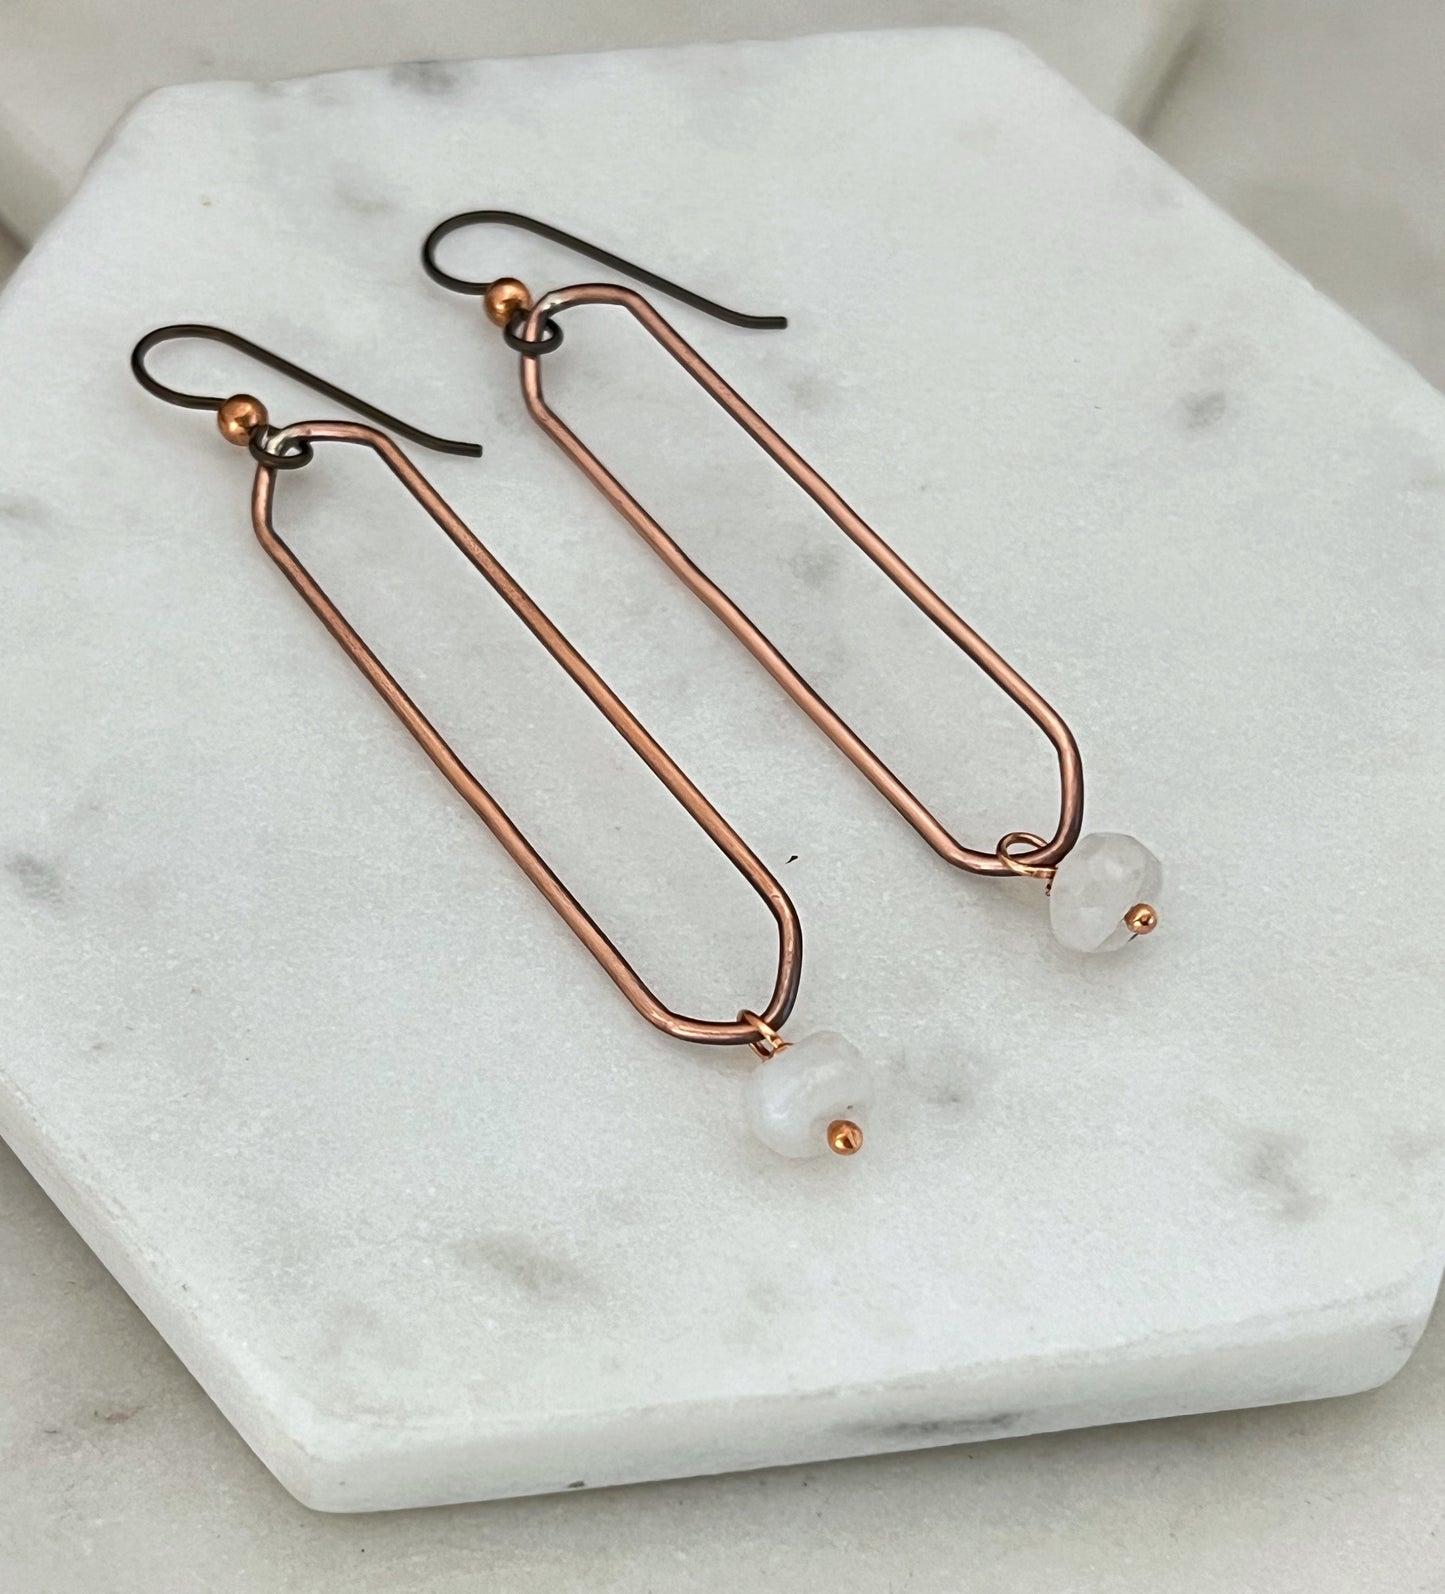 Copper oval hoops with moonstone gemstones